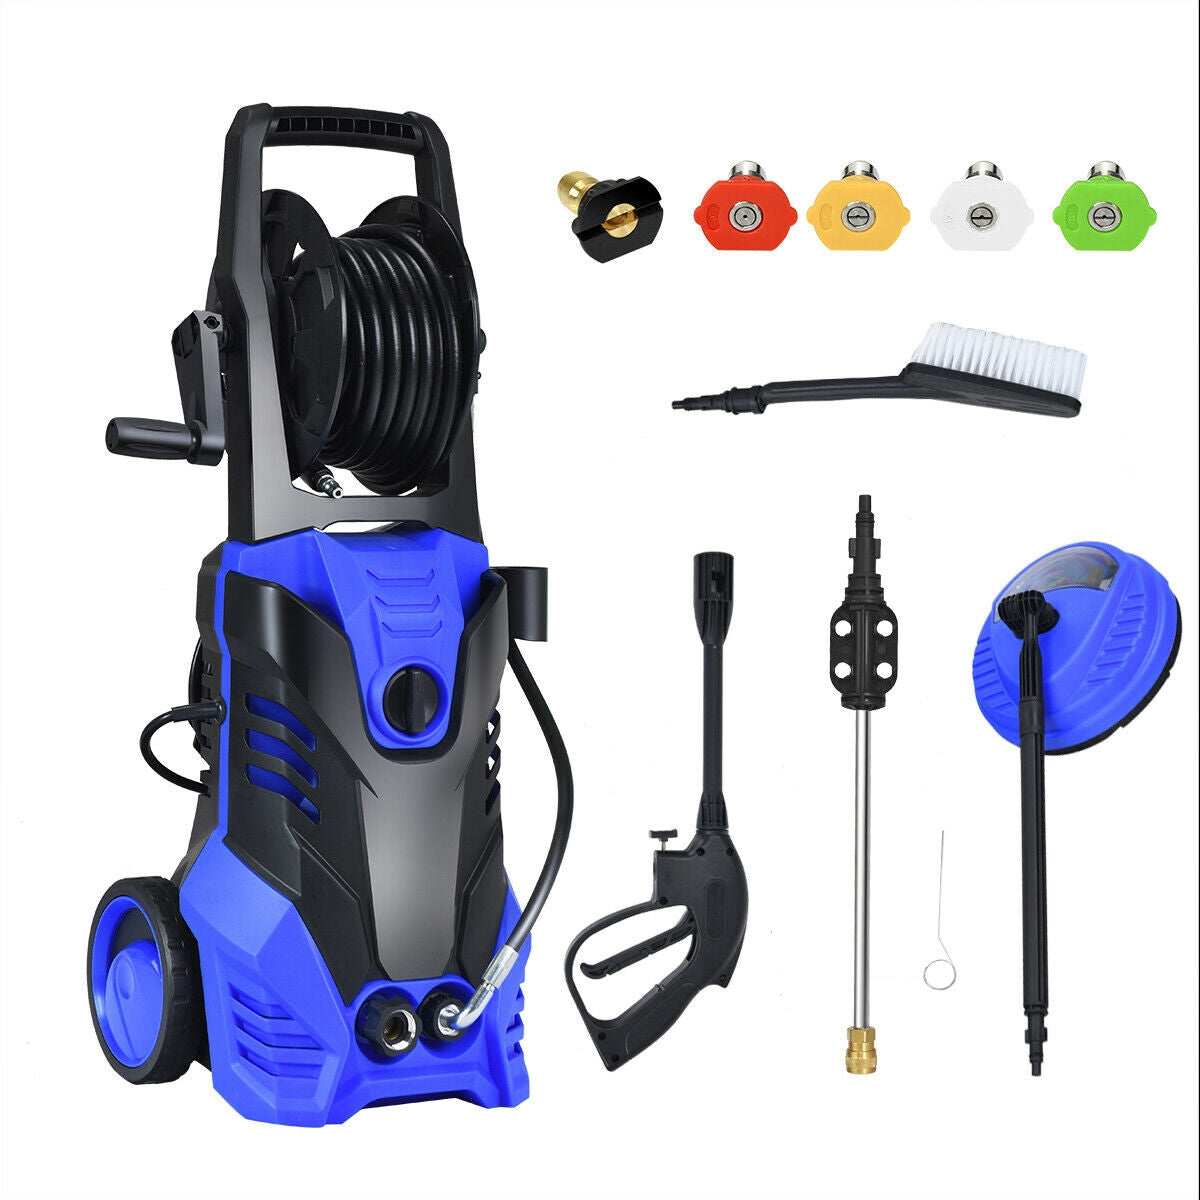 Hikidspace 3000PSI Electric Portable High Power Washer with 5 Nozzles